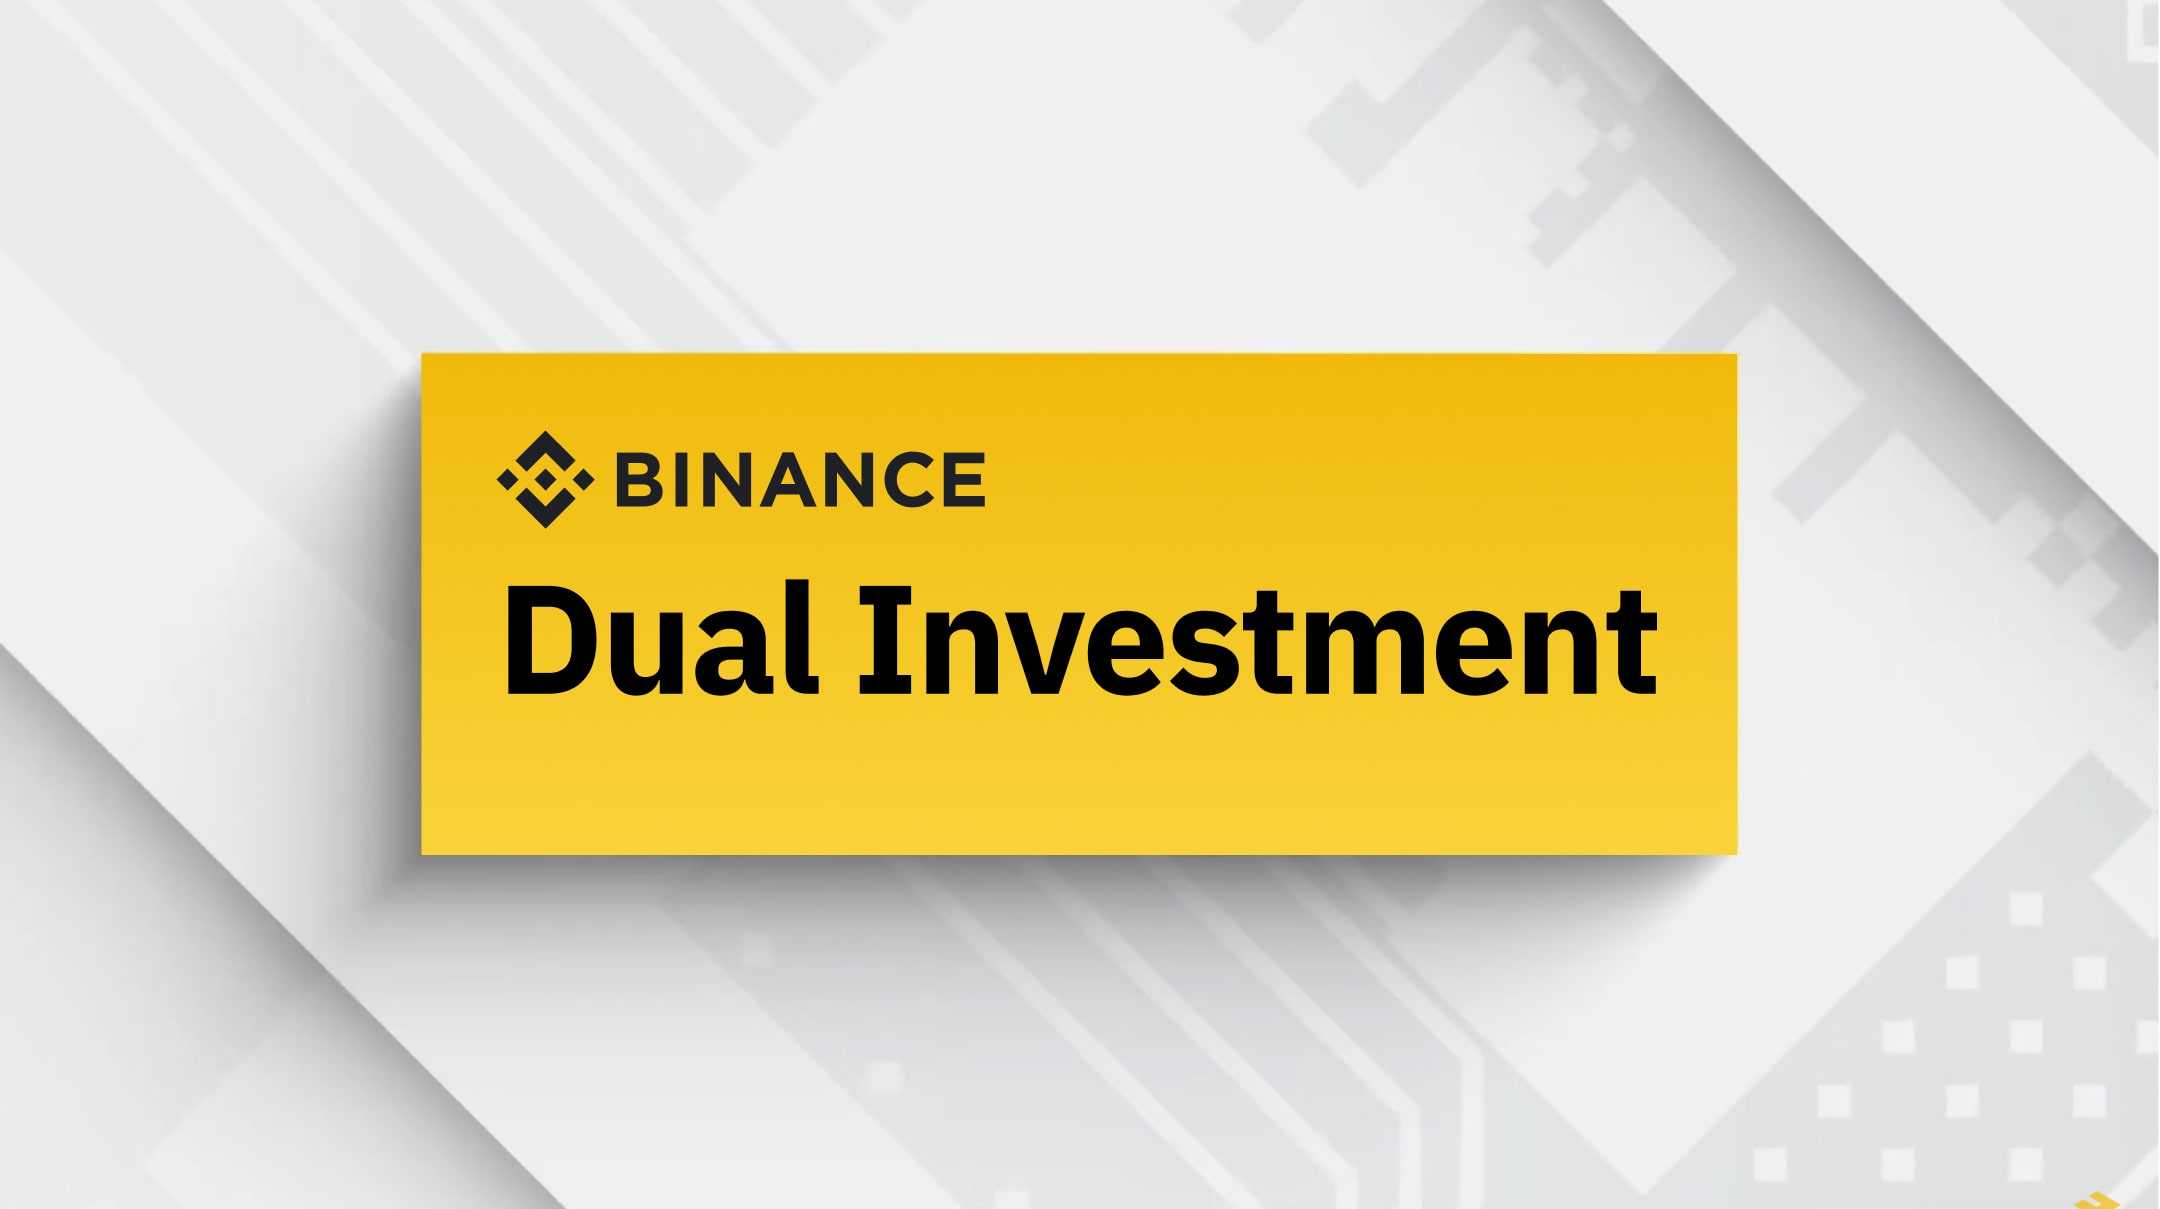 Binance Dual Investment is is a non-principal protected structured saving product